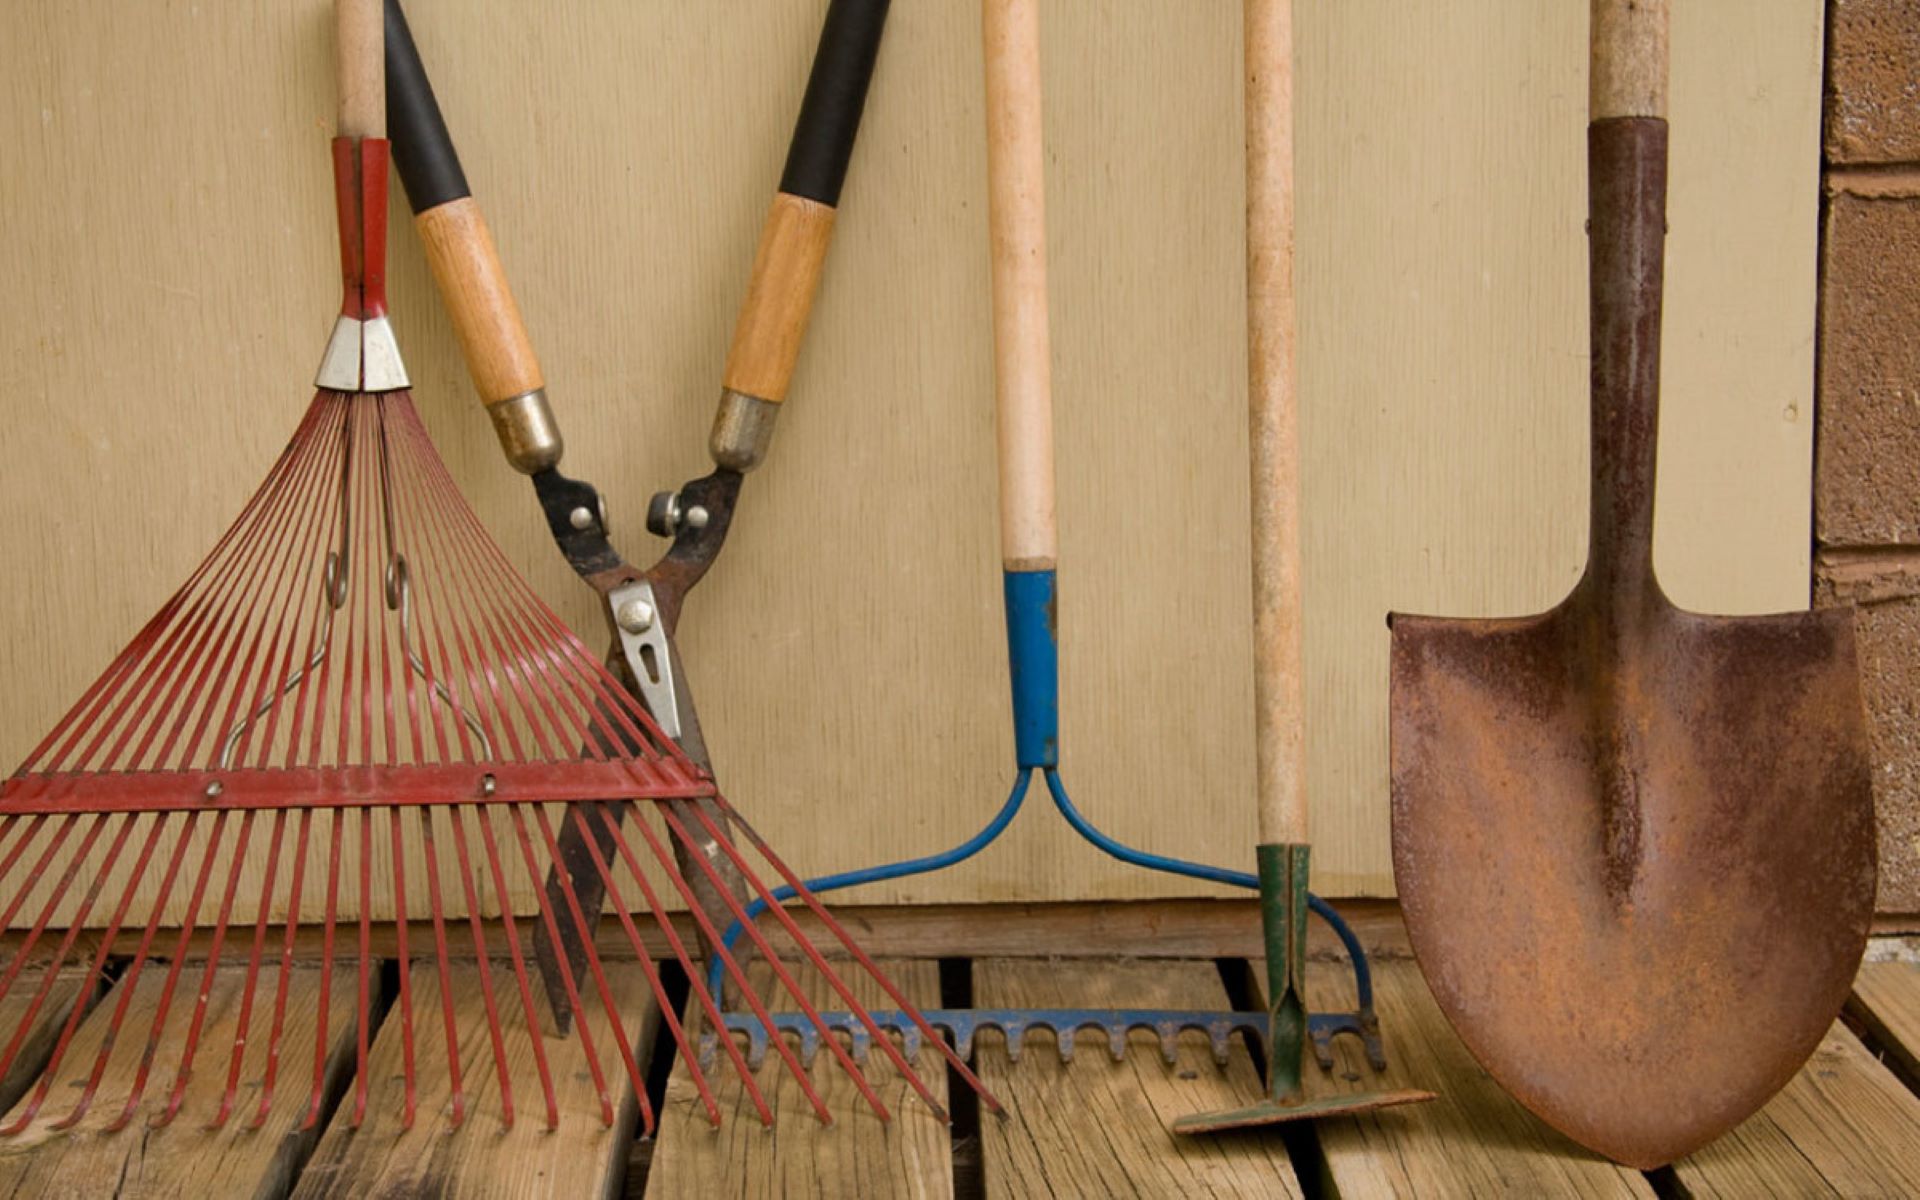 How To Store Rakes And Shovels